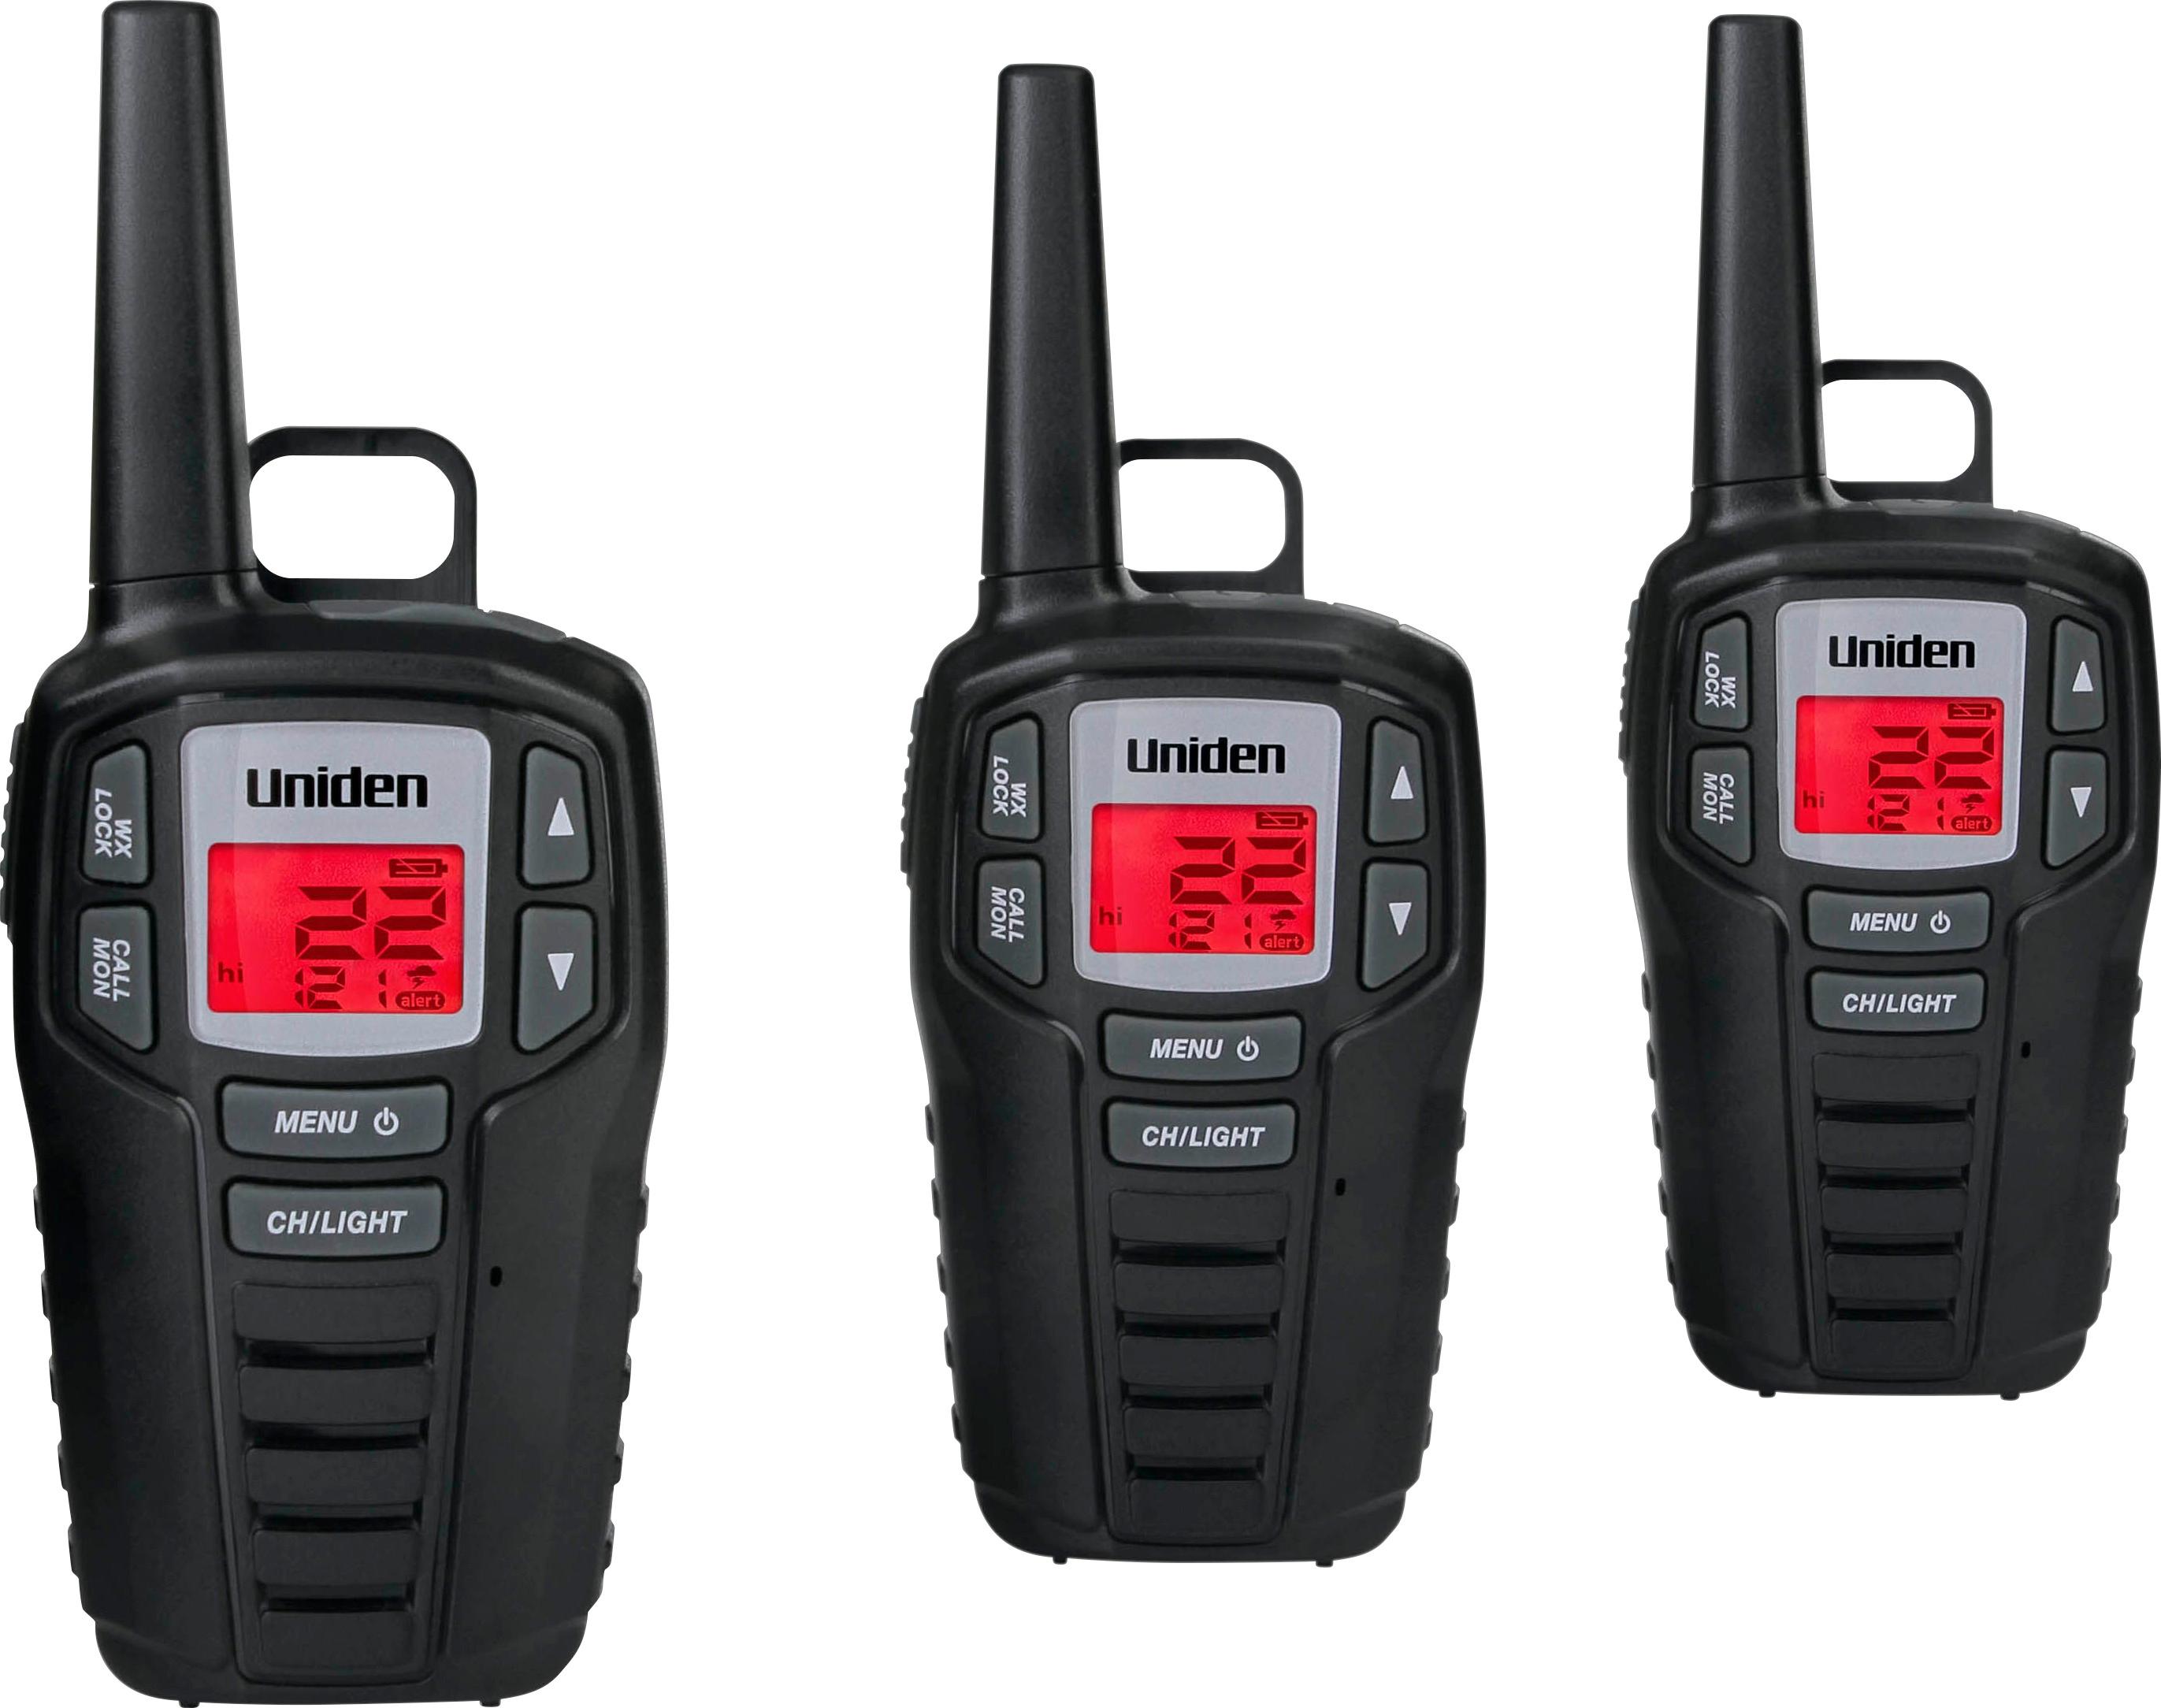 Uniden GMRS 30-Mile, 22-Channel GMRS 2-Way Radios Black SX307-3C Best Buy